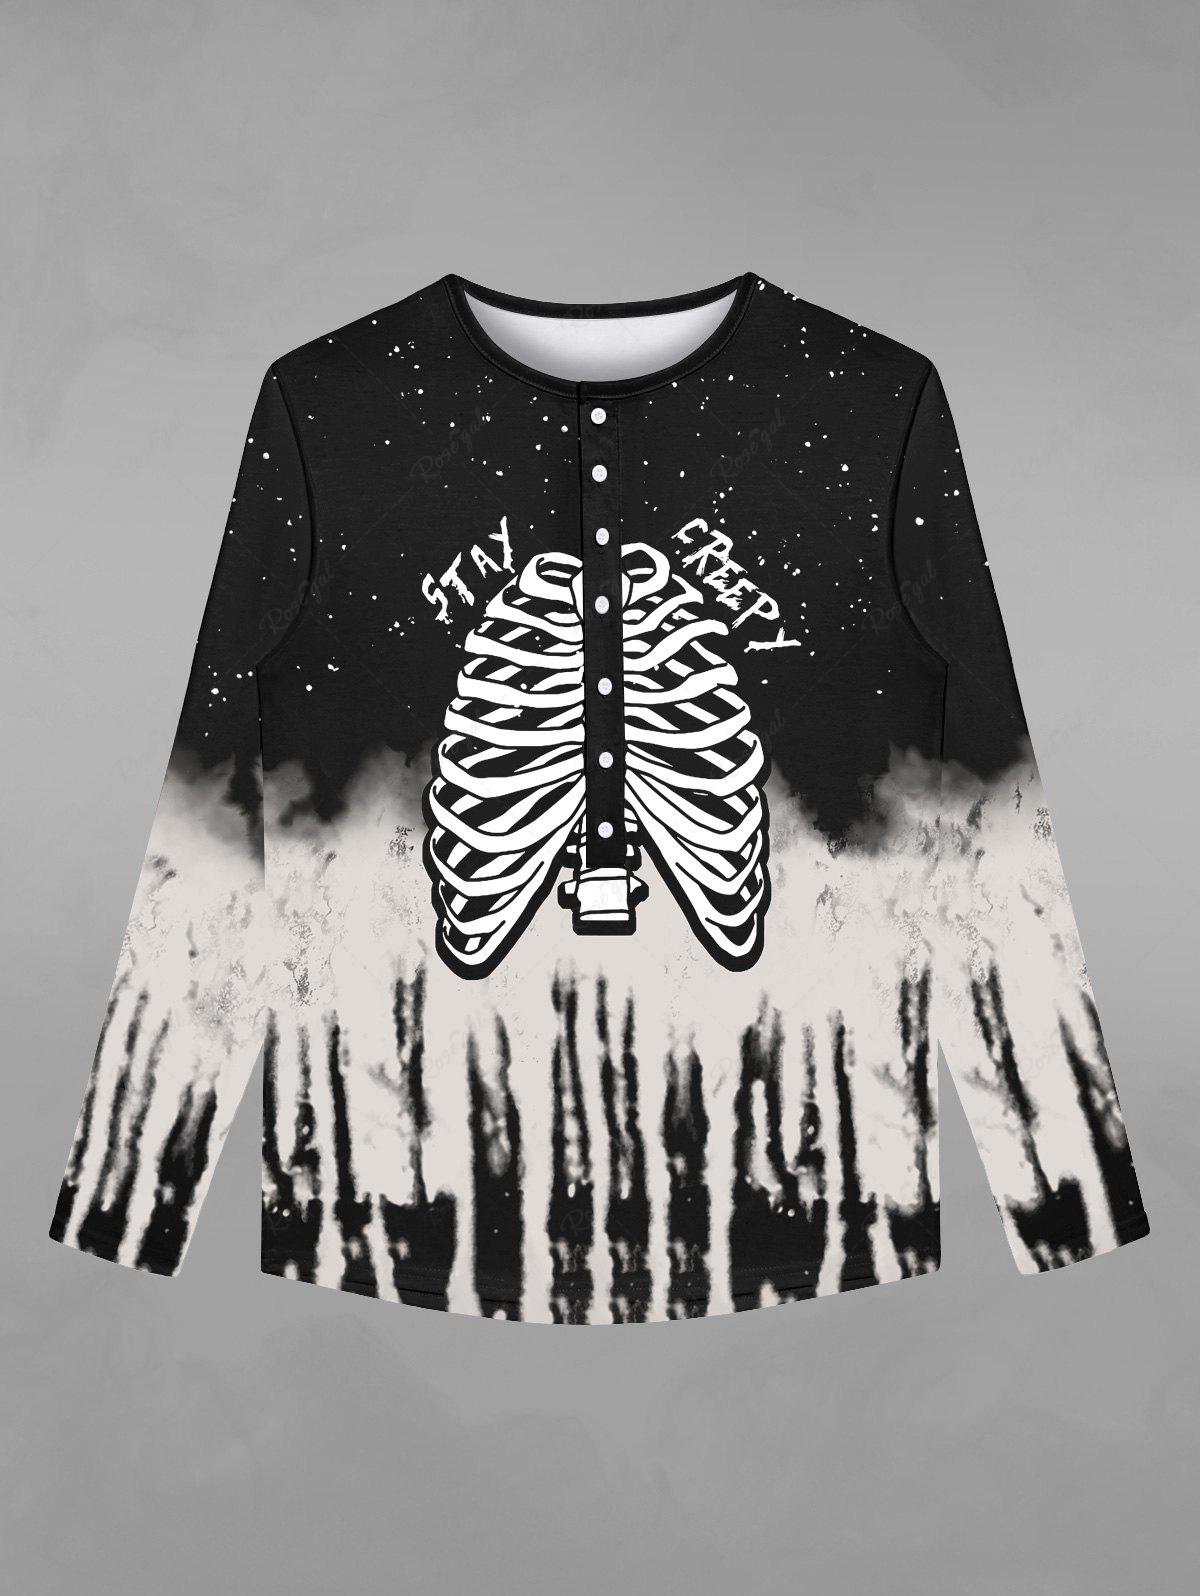 Gothic Galaxy Skeleton Distressed Print Buttons Halloween T-shirt For Men